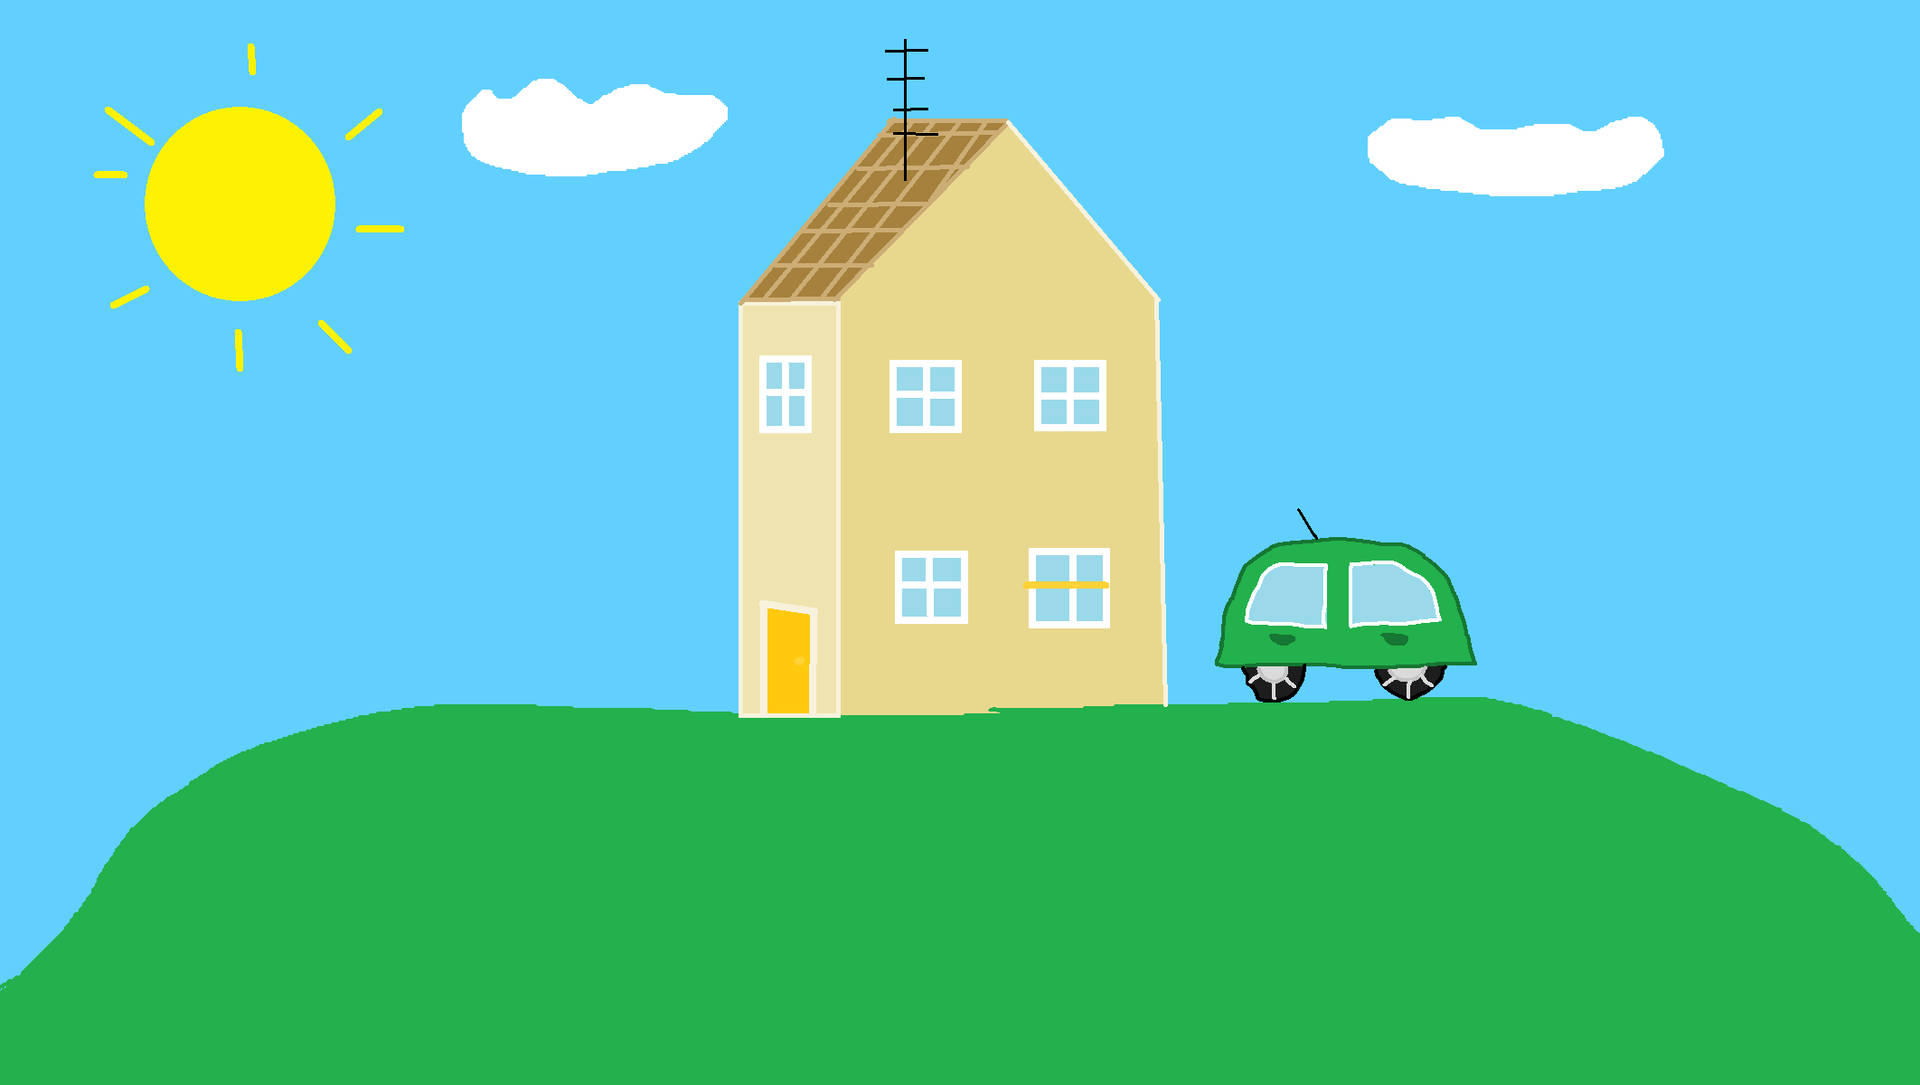 Peppa Pig House With Green Car Wallpaper